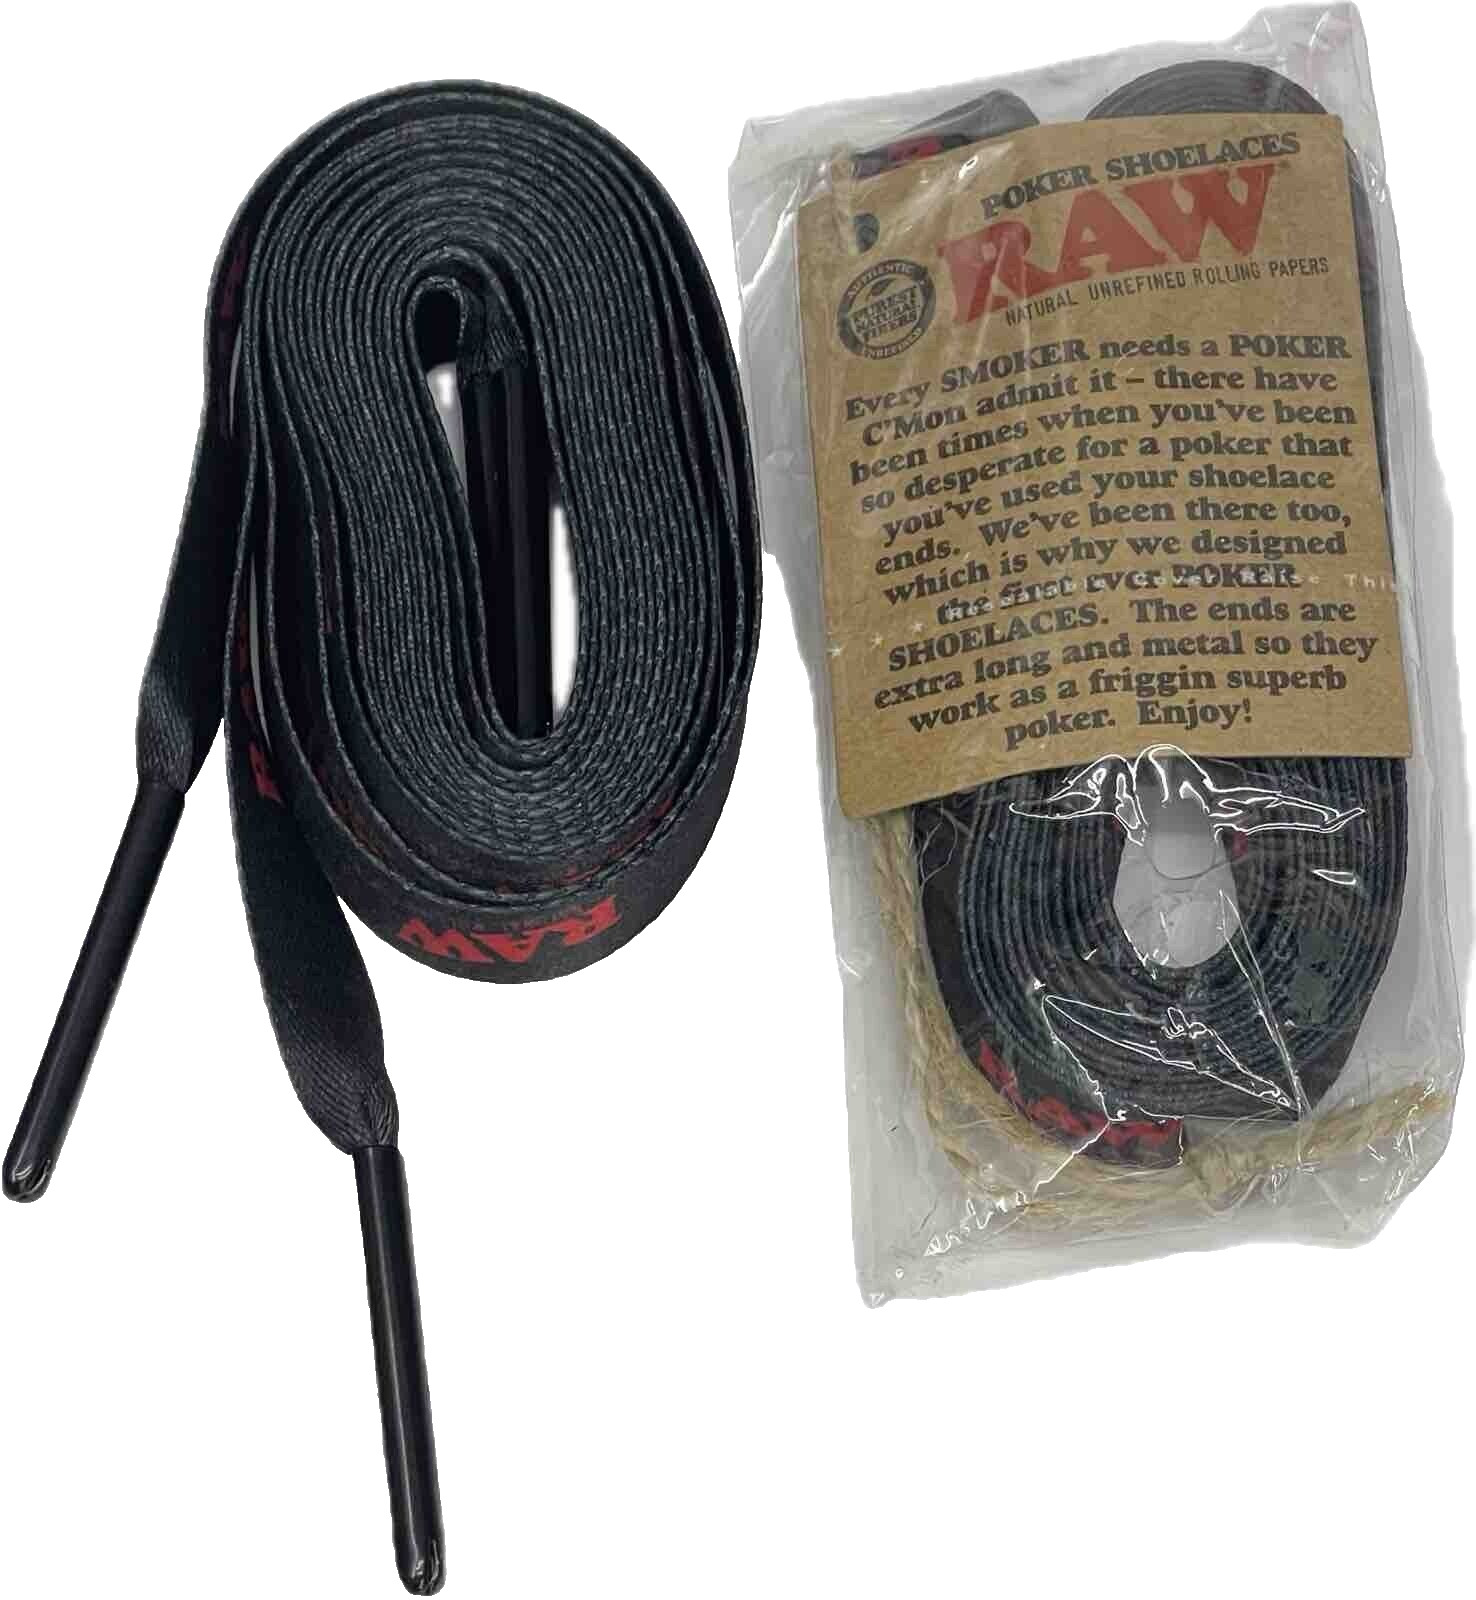 2x RAW Rolling Papers Poker Shoelaces With Poker Ends **Free Shipping**